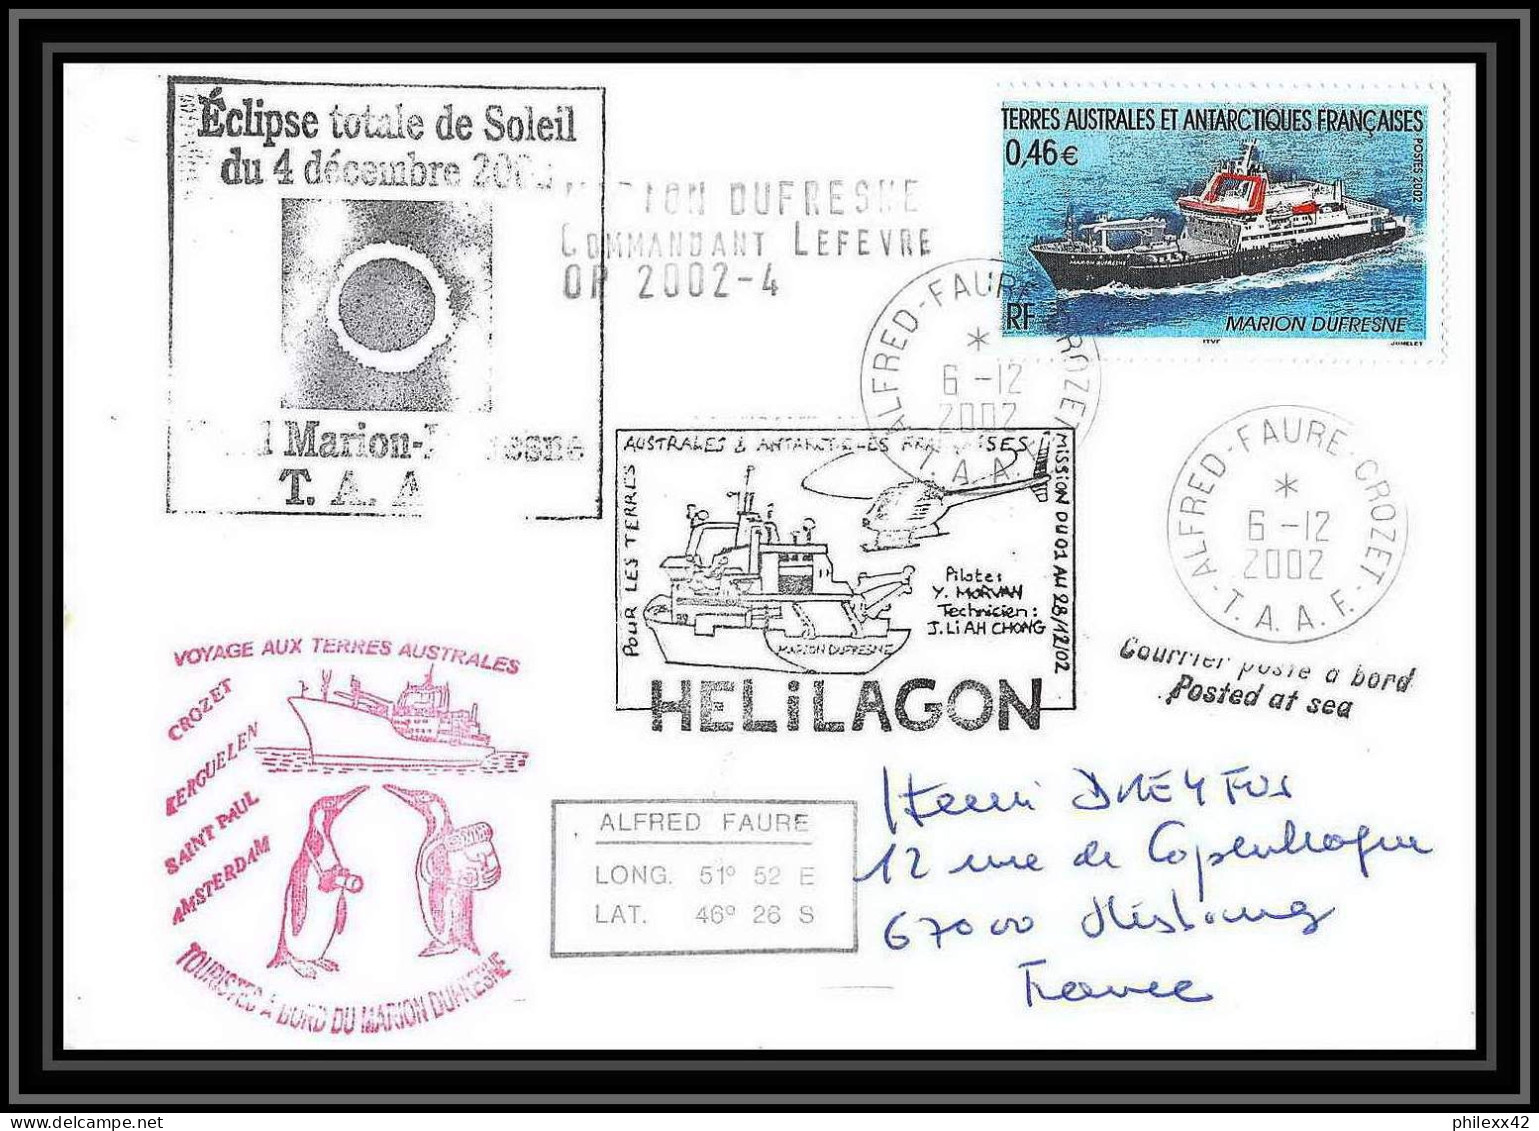 2386 ANTARCTIC Terres Australes TAAF Lettre Cover Dufresne 2 N°330 Helilagon Signé Signed Op 2002/4 6/12/2002 - Spedizioni Antartiche